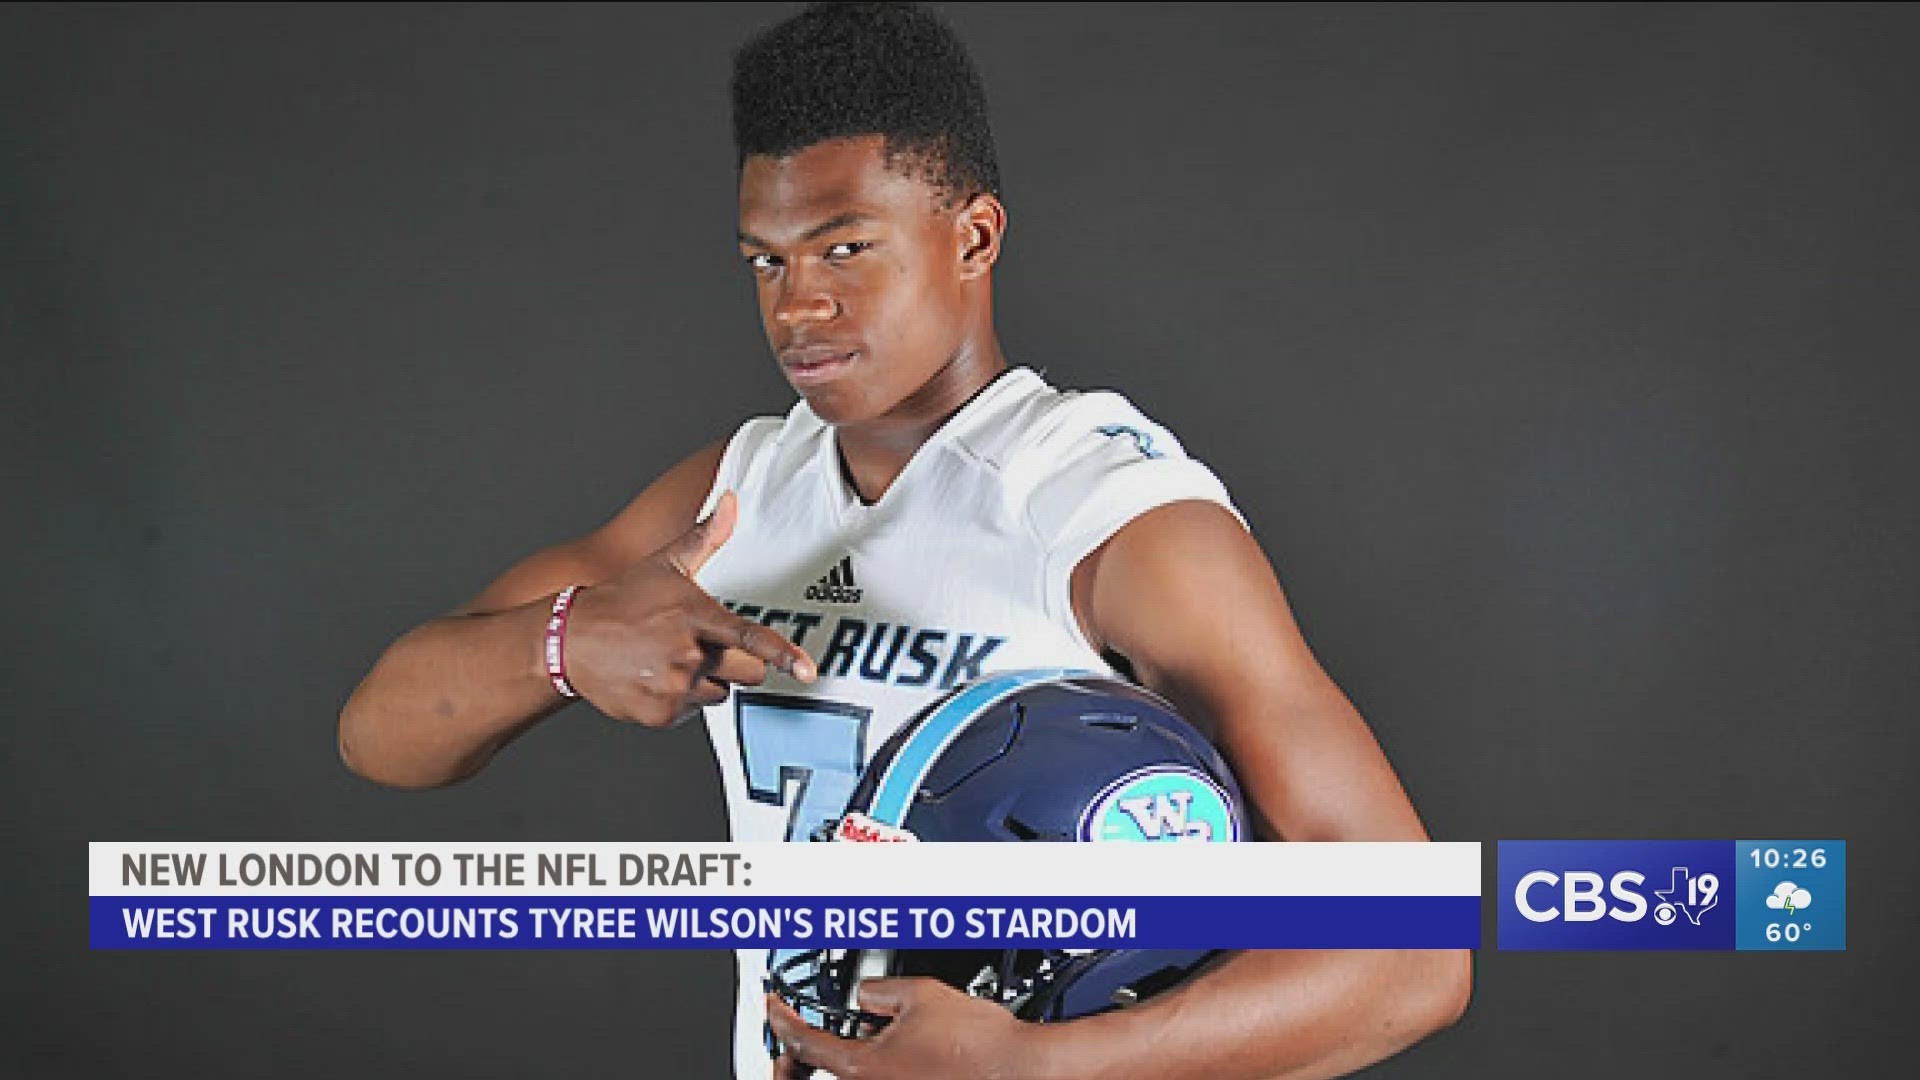 The former West Rusk star has made a name for himself, projected to become a top-ten pick in the 2023 NFL Draft.